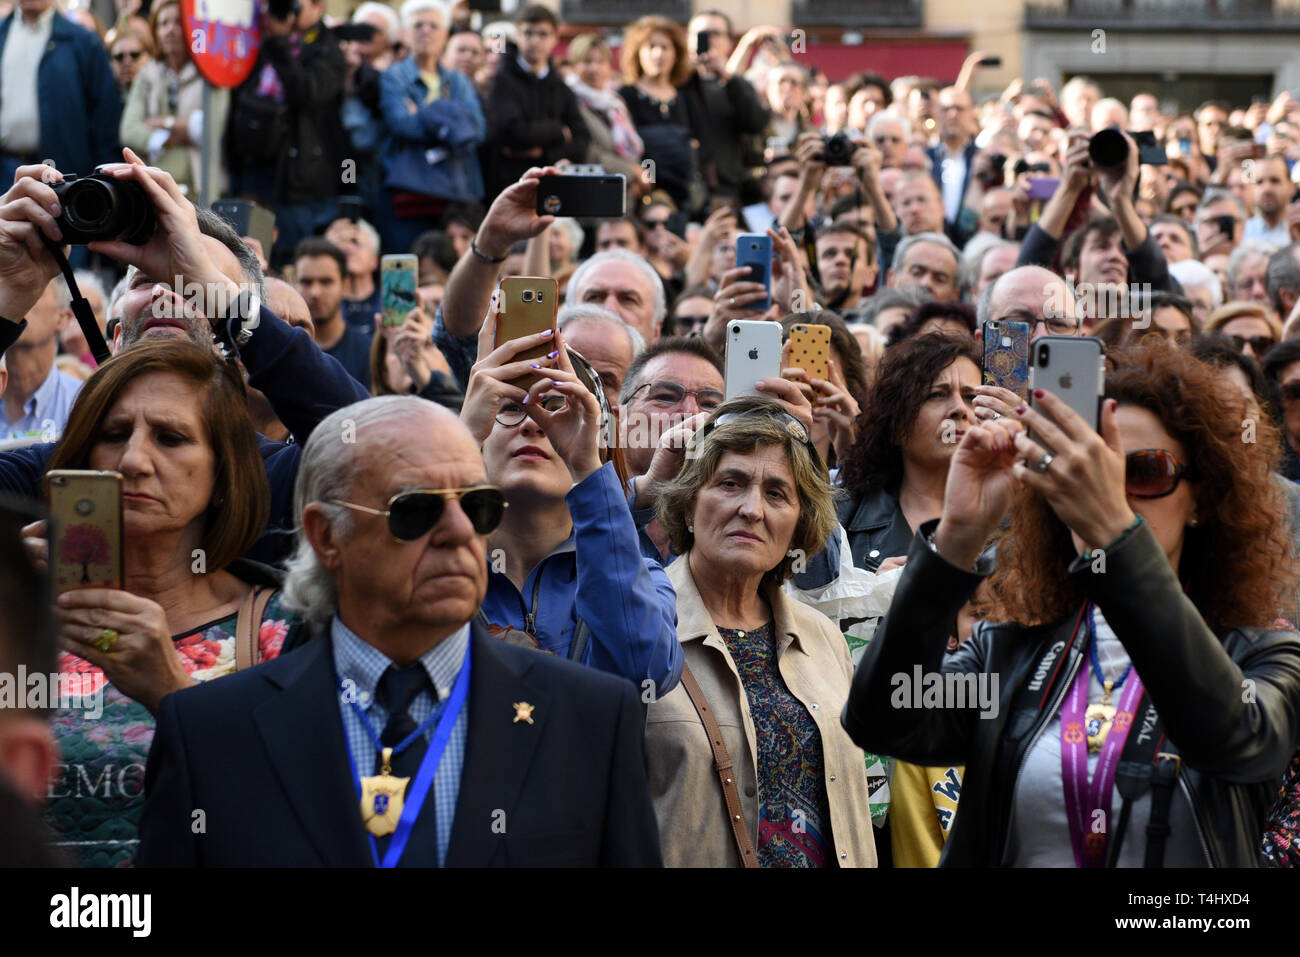 Faithful are seen taking pictures during the 'Cristo de Los Alabarderos' procession in Madrid. Cristo de Los Alabarderos procession, also known as the procession of Spanish Royal Guard, took place on the Holy Tuesday and in Good Friday in Madrid. Penitents carried a statue of Jesus Christ from 'De las Fuerzas Armadas' church to 'Real' palace in central Madrid and on Good Friday penitents will march in reverse, this has been celebrated since 1753 and it is one of the most important processions of the Holy Week in Madrid. Stock Photo